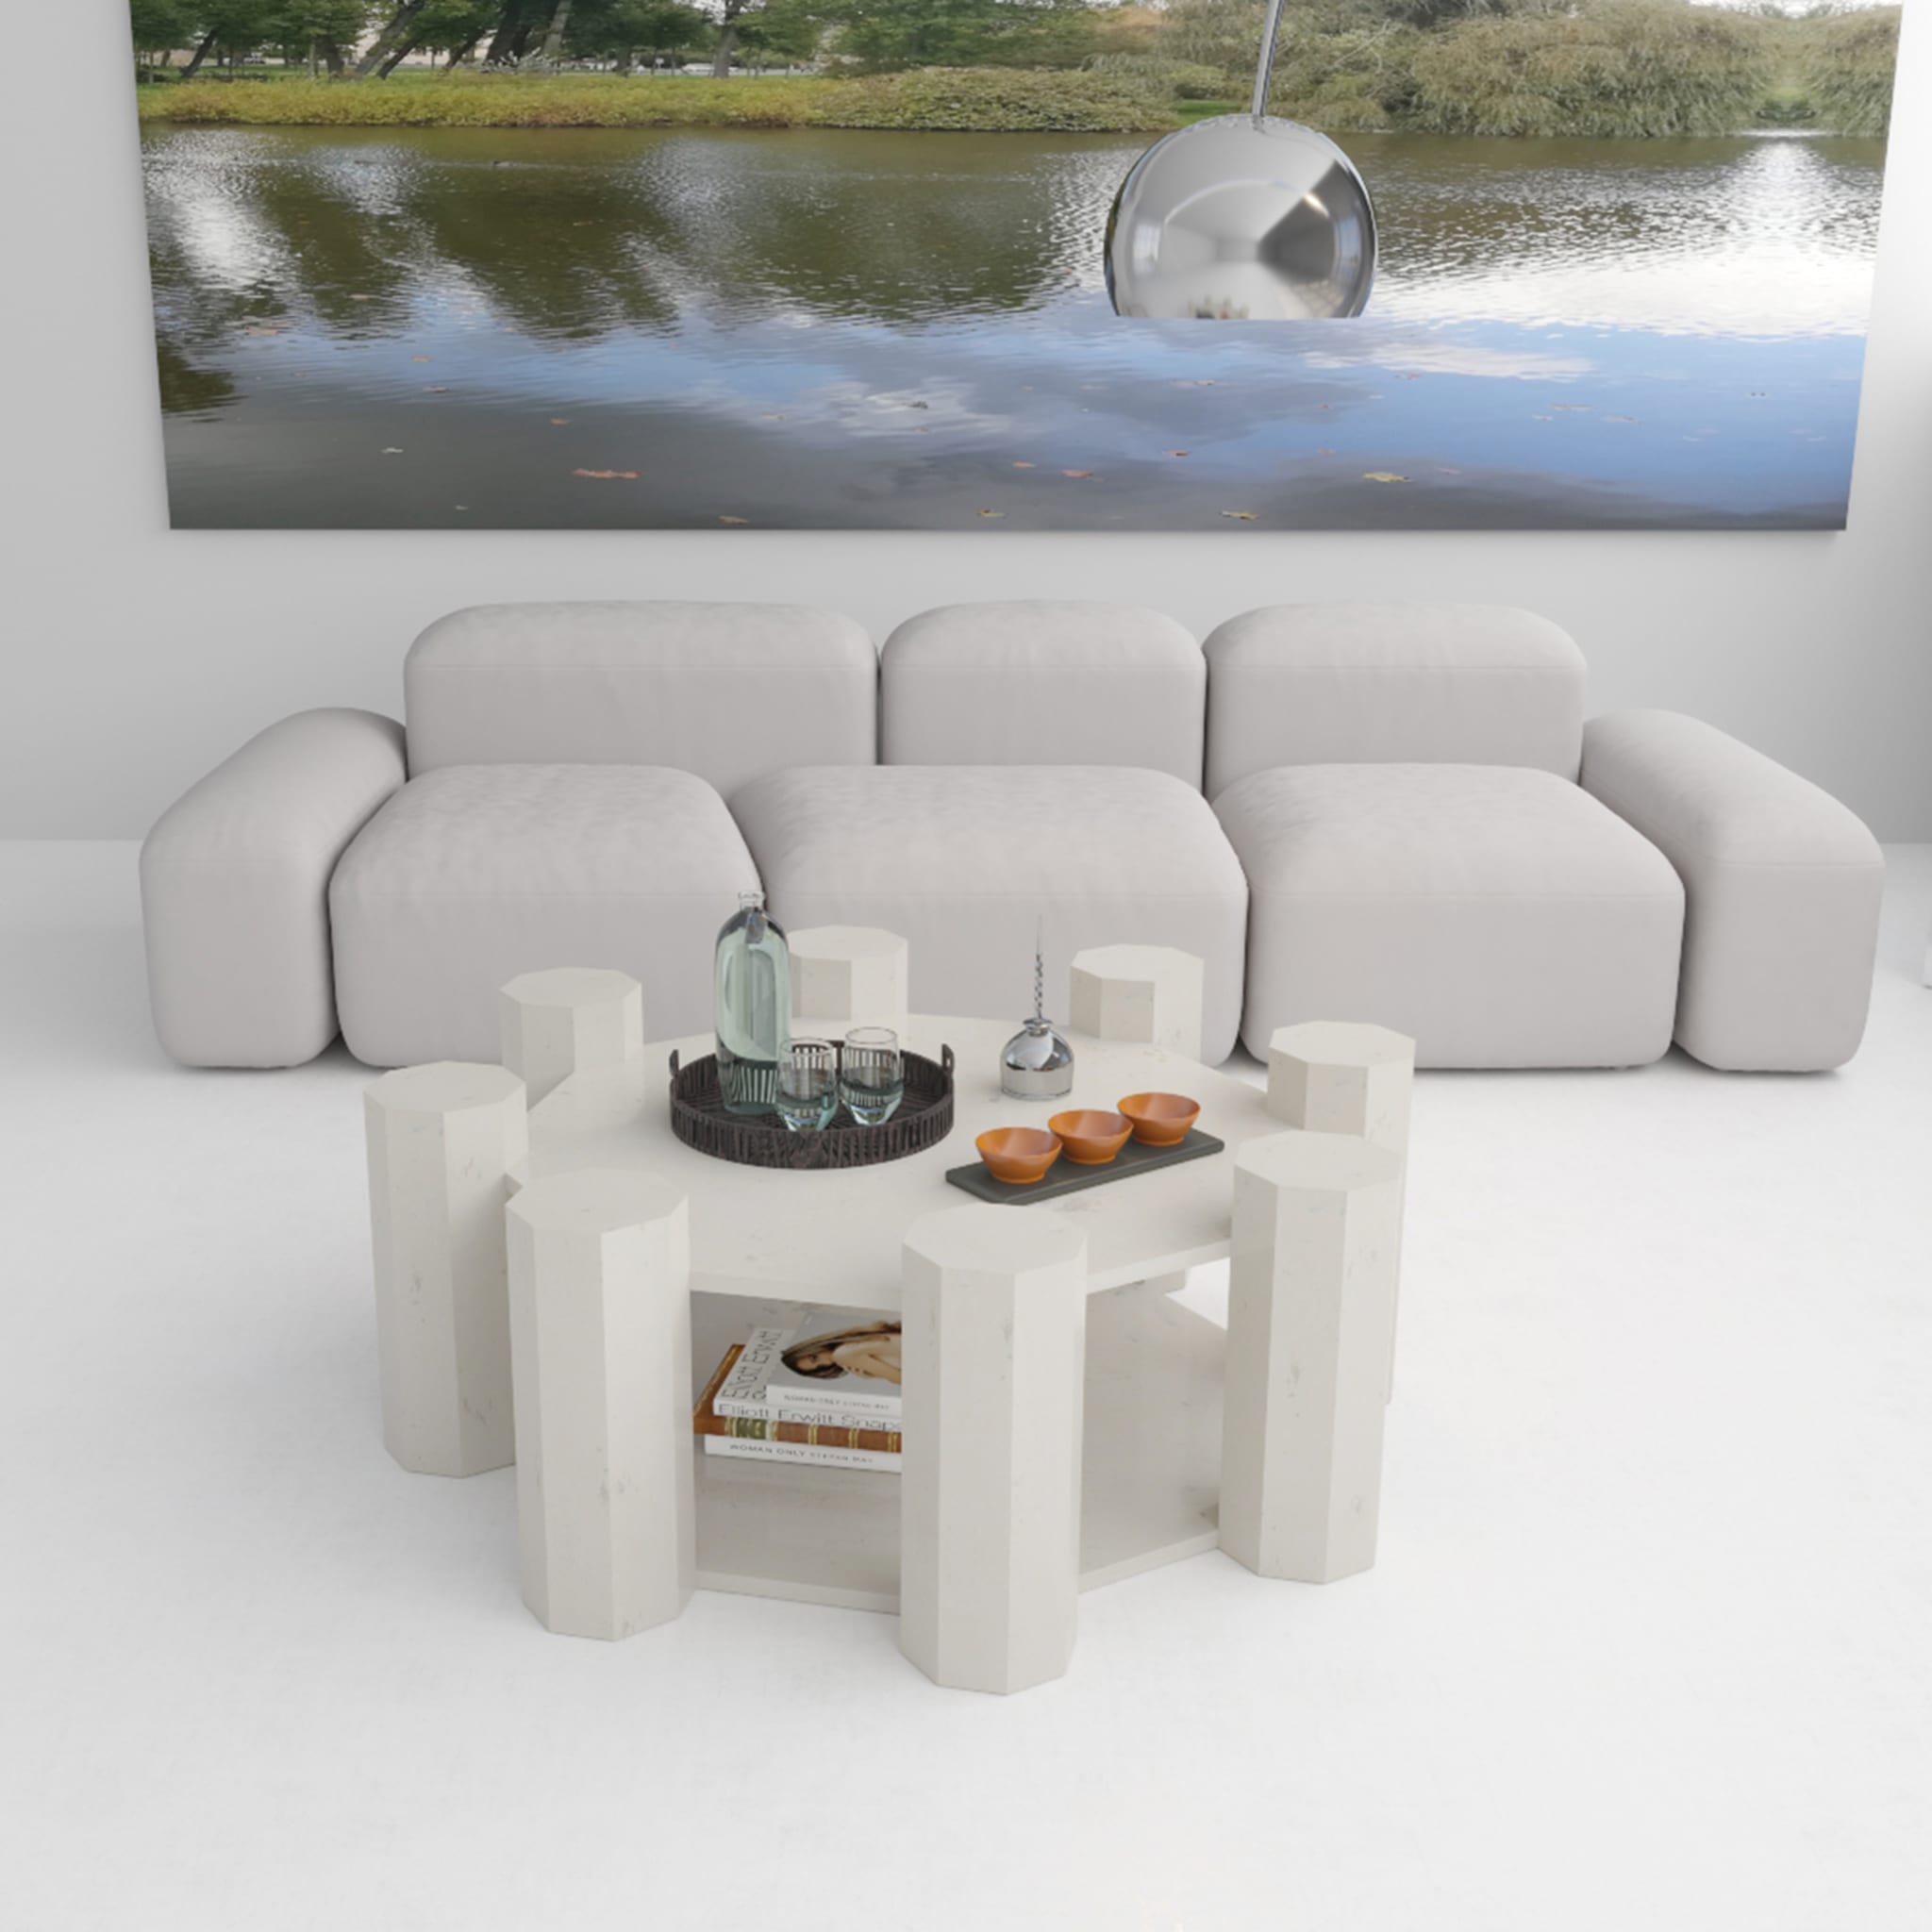 Federico Coffee Table in White Marble By Sissy Daniele - Alternative view 2